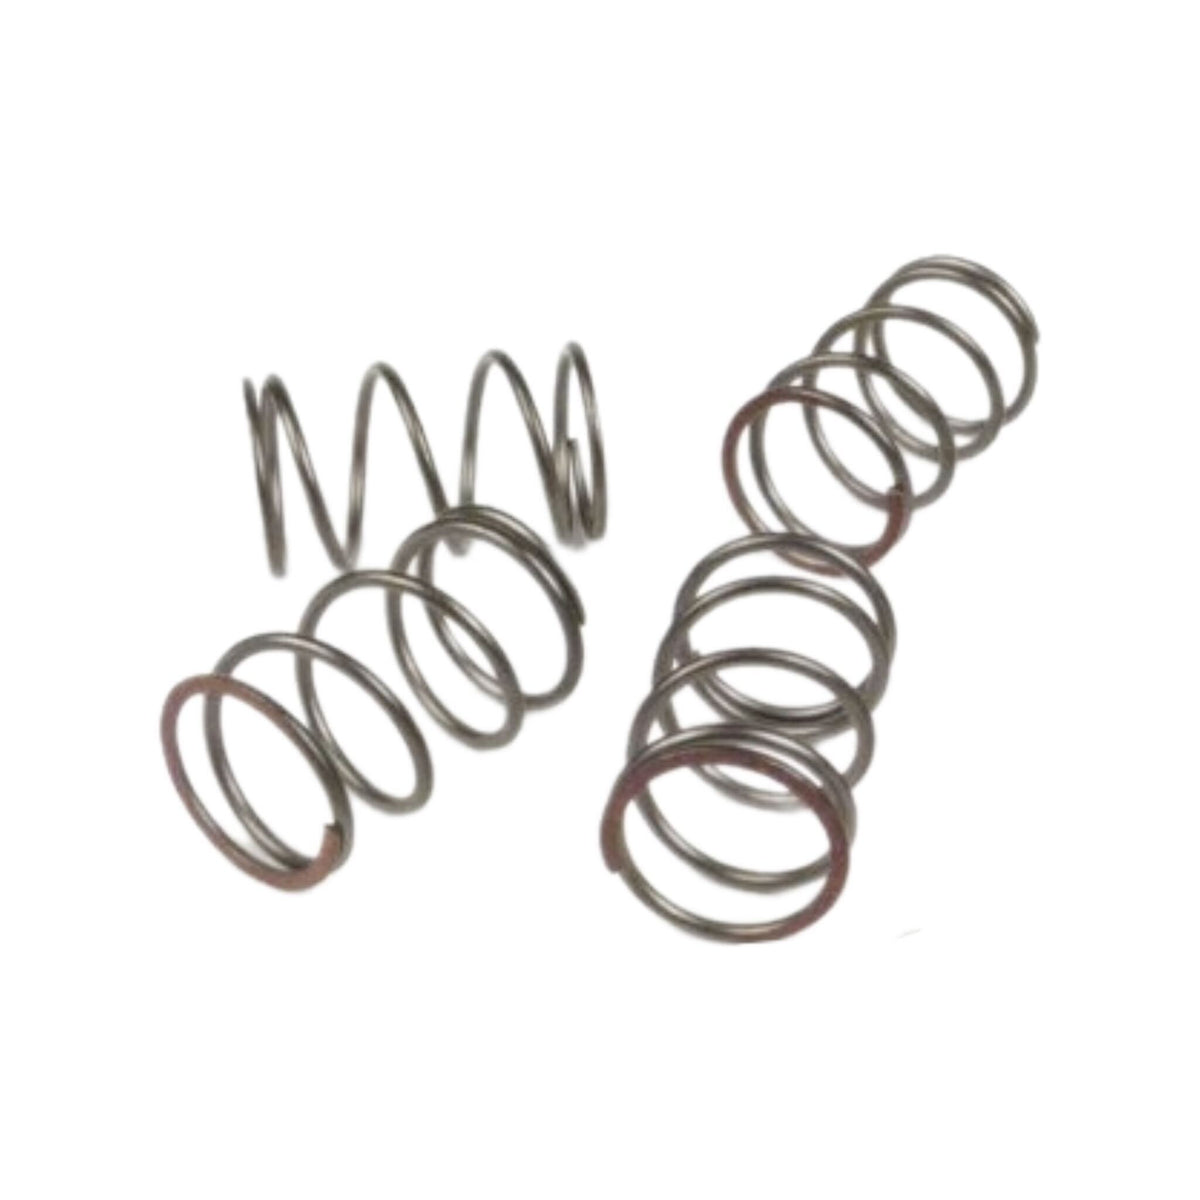 Lambretta 5 Plate Competition Clutch Extra Strong Spring Kit (4)